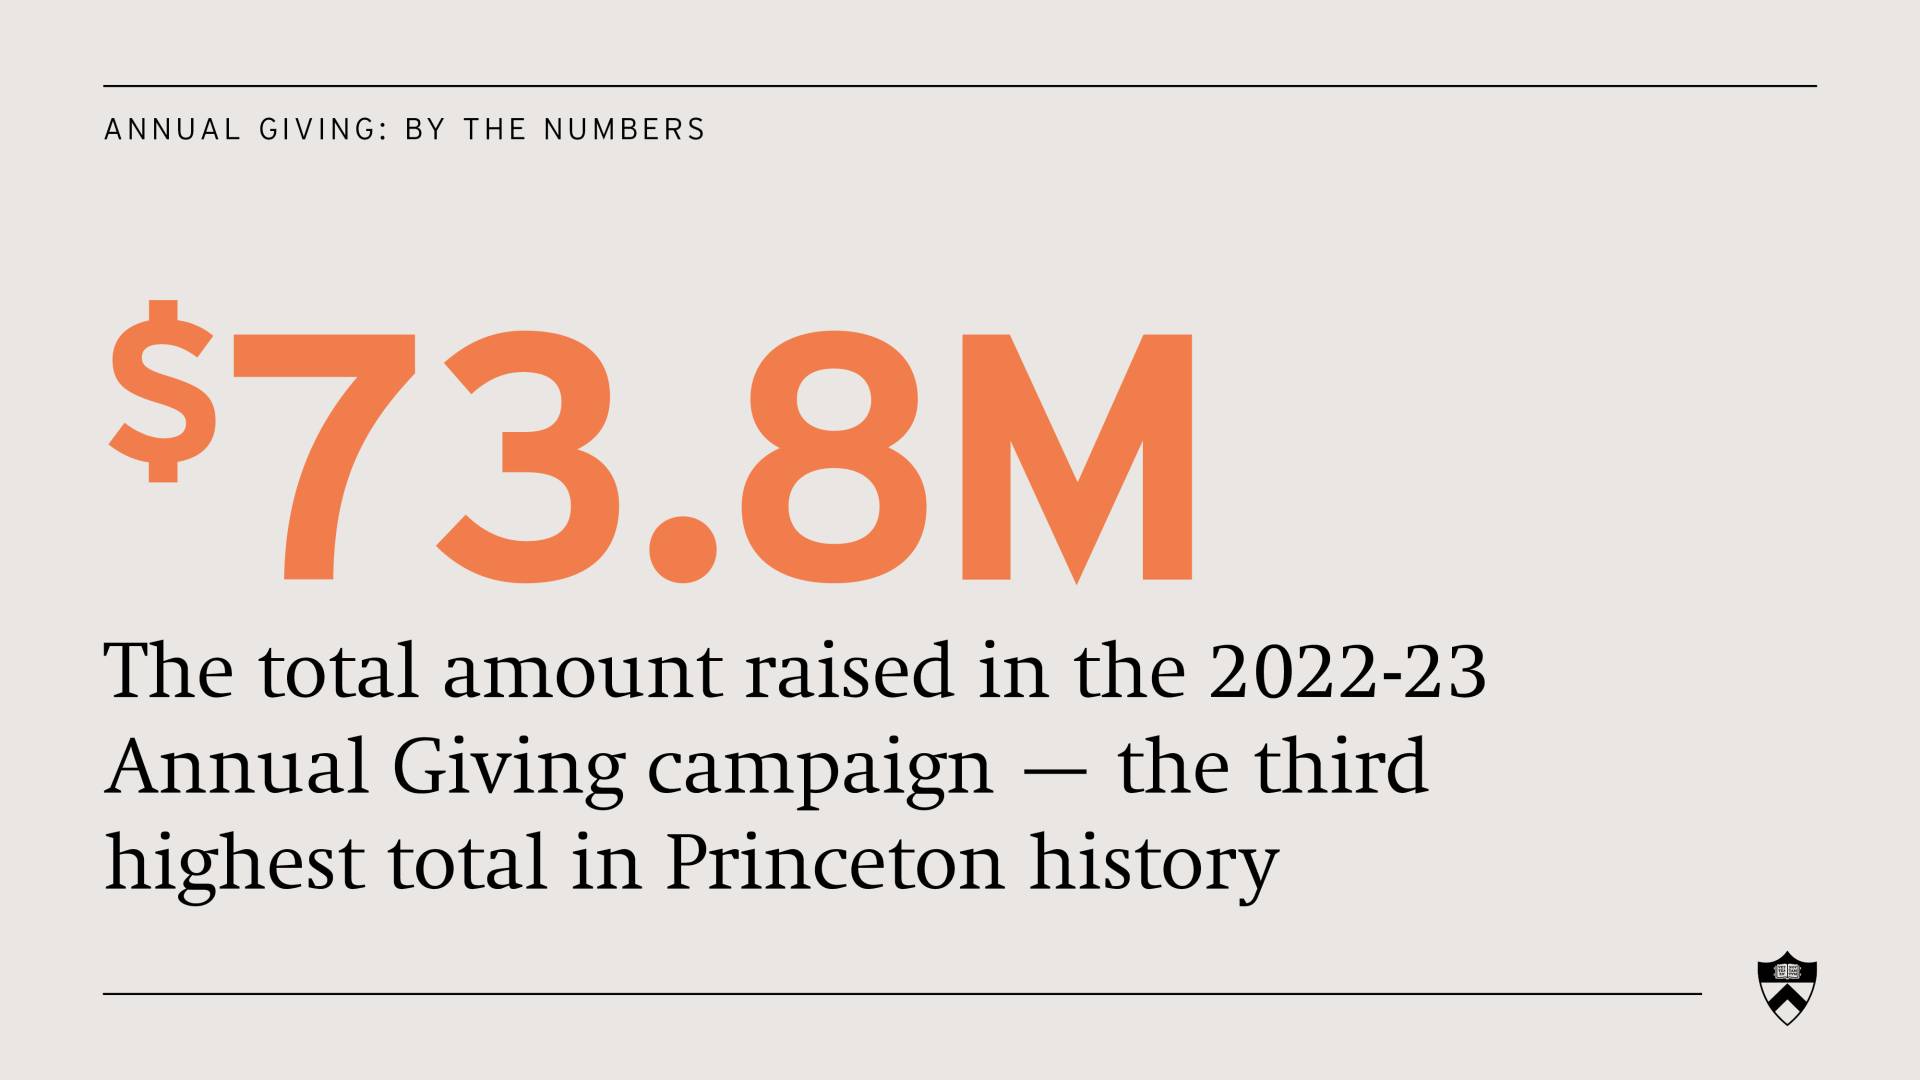 The total amount raised in the 2022-23 Annual Giving campaign is $73.8 million — the third highest total in Princeton history.